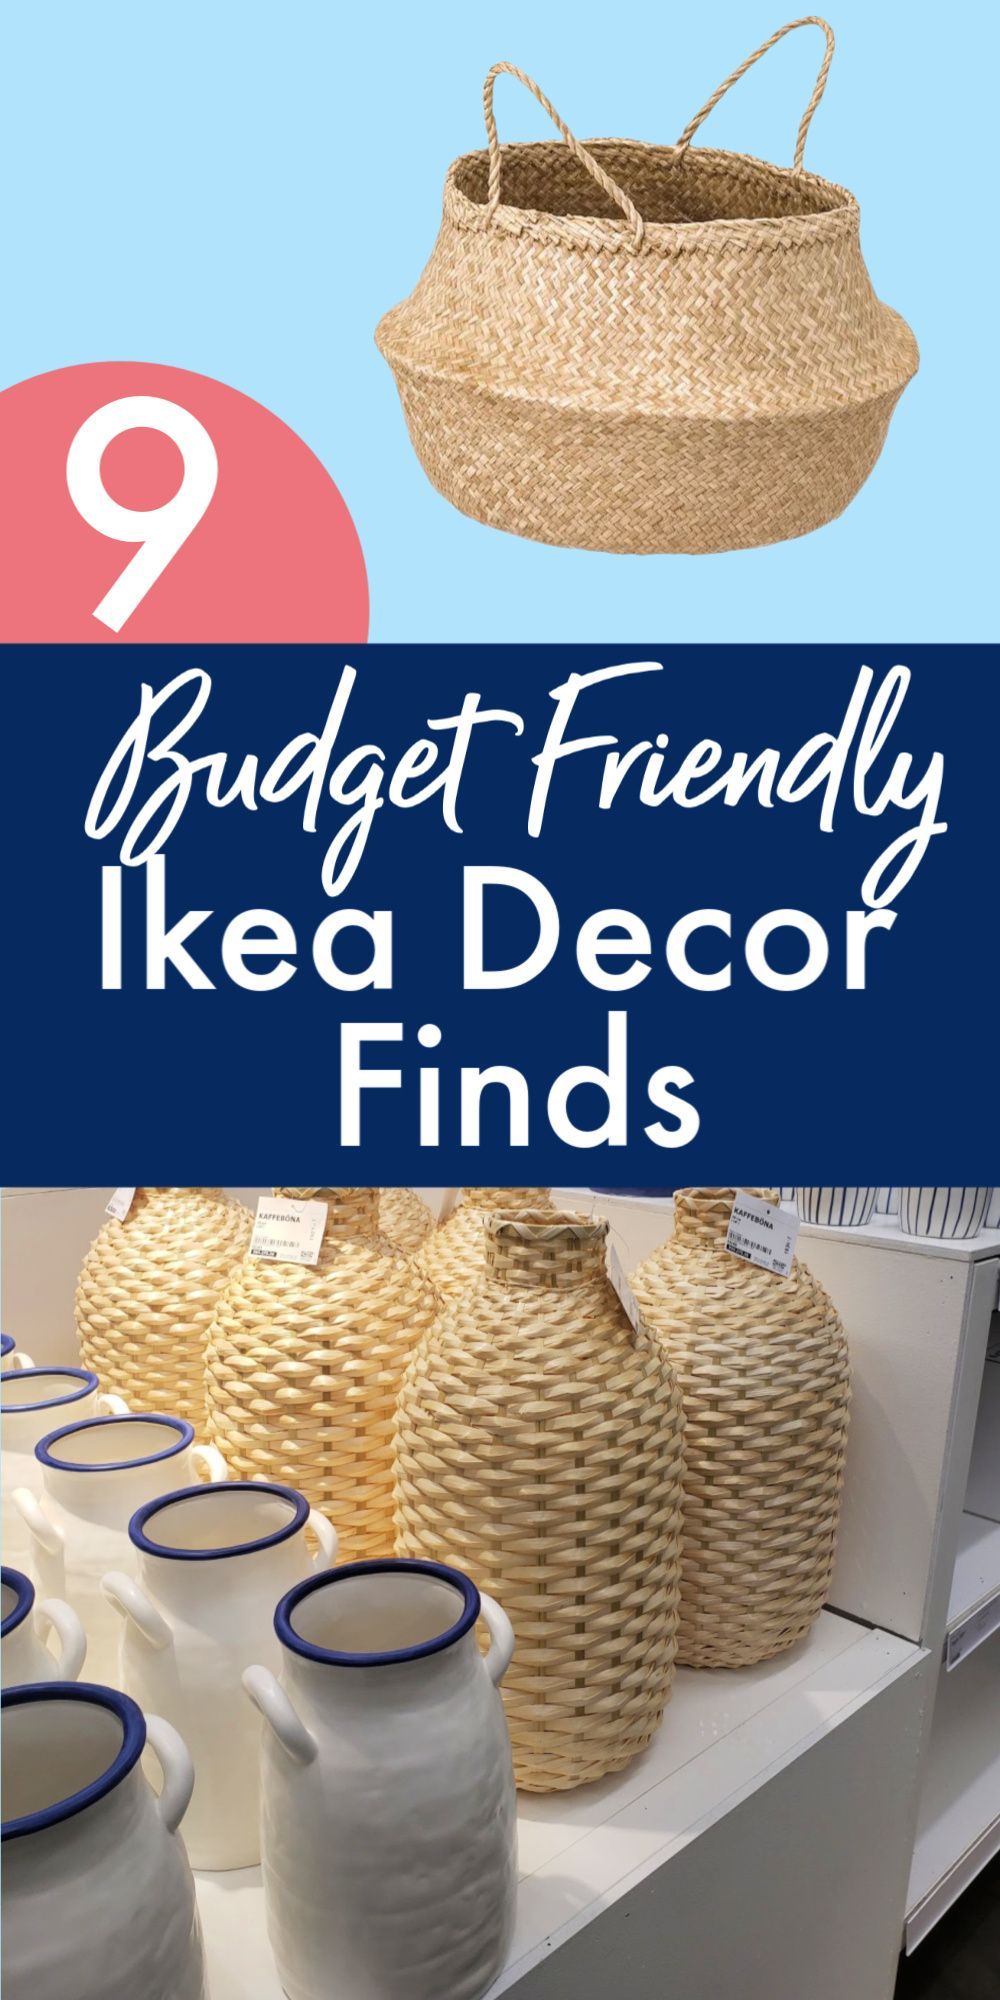 9 Budget Friendly Ikea Decor Finds You'll Love - 9 Budget Friendly Ikea Decor Finds You'll Love -   19 diy Home Decor inexpensive ideas